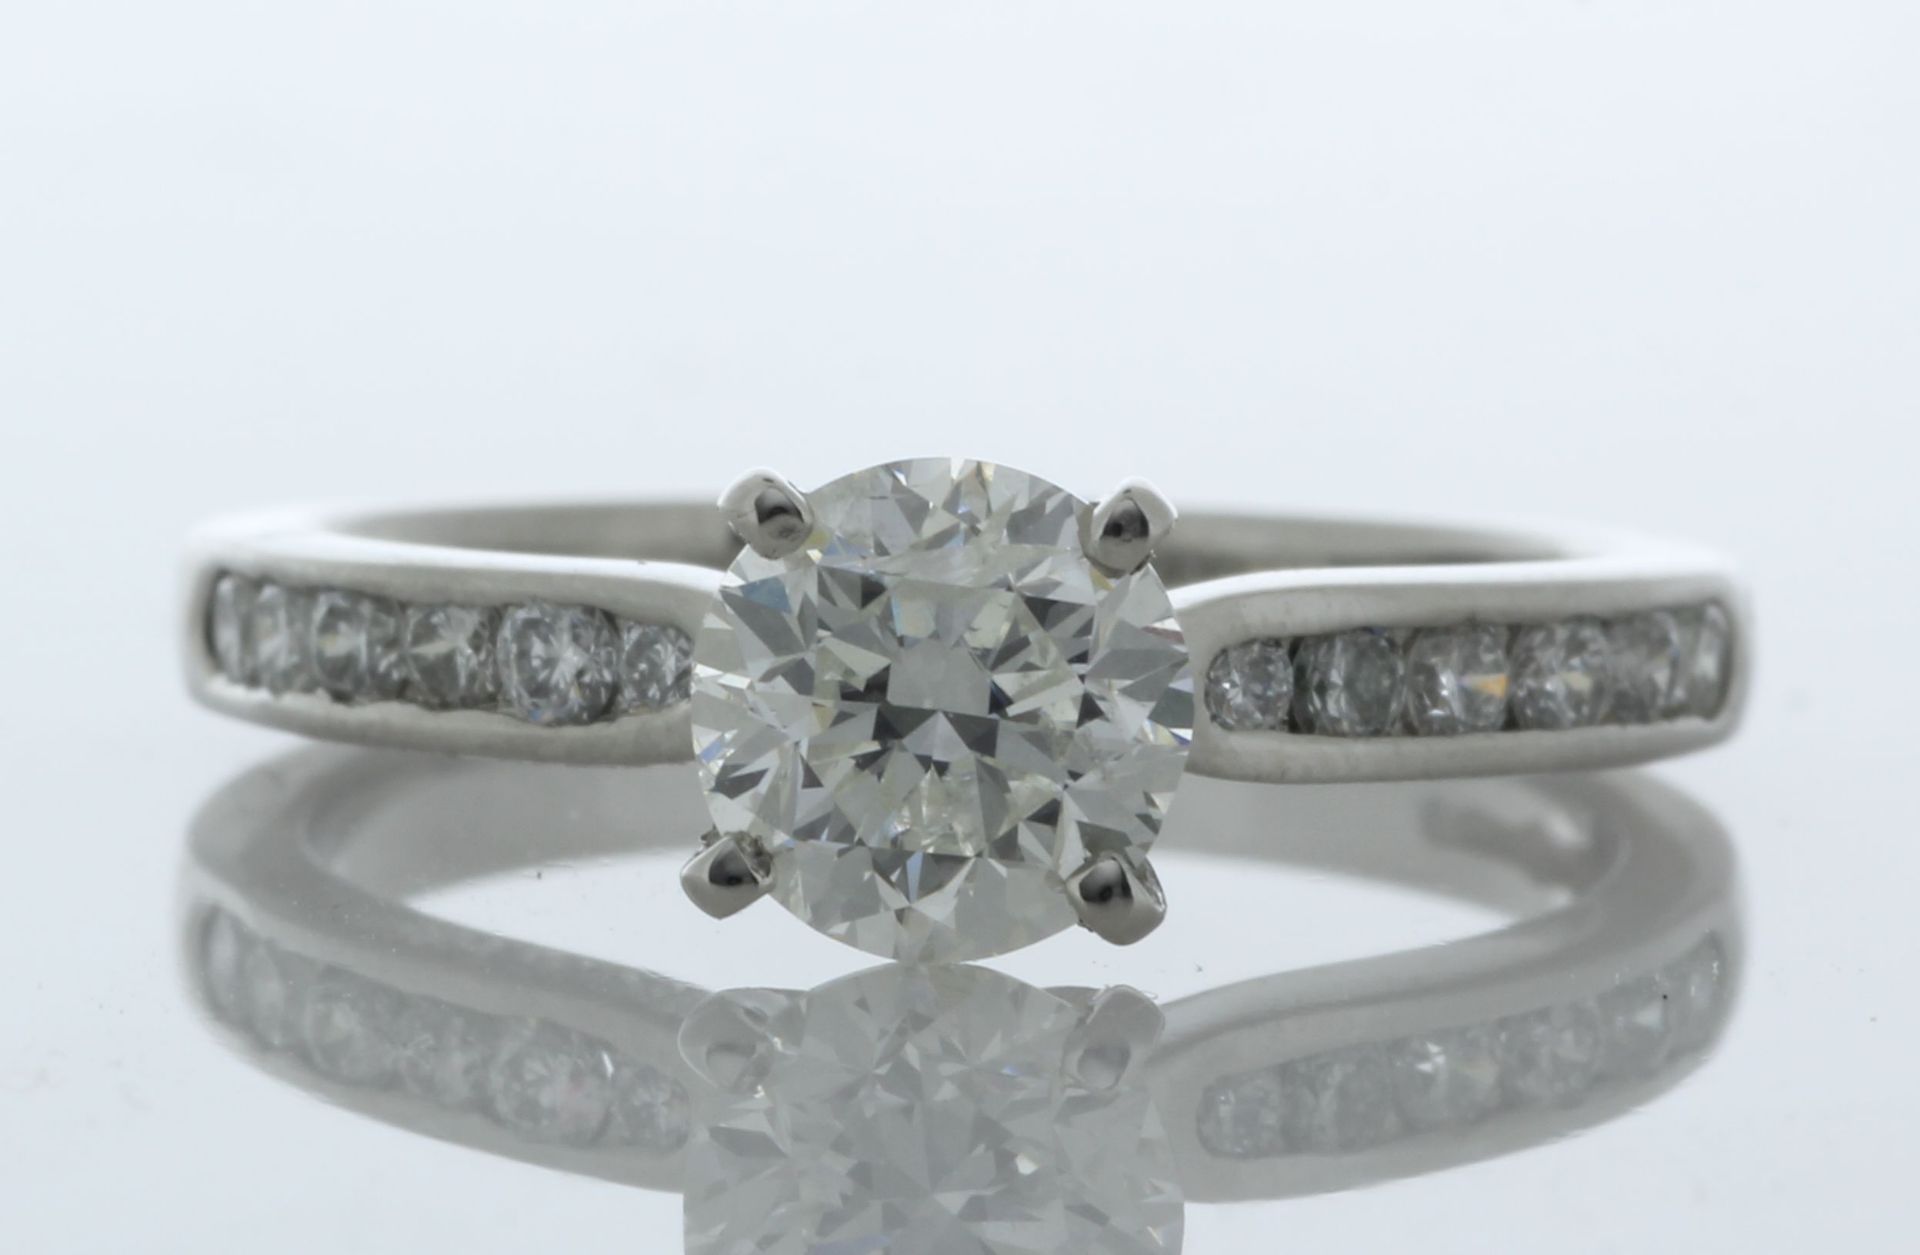 Platinum Diamond Ring (1.01) 1.19 Carats - Valued By AGI £24,720.00 - A 1.01 carats round